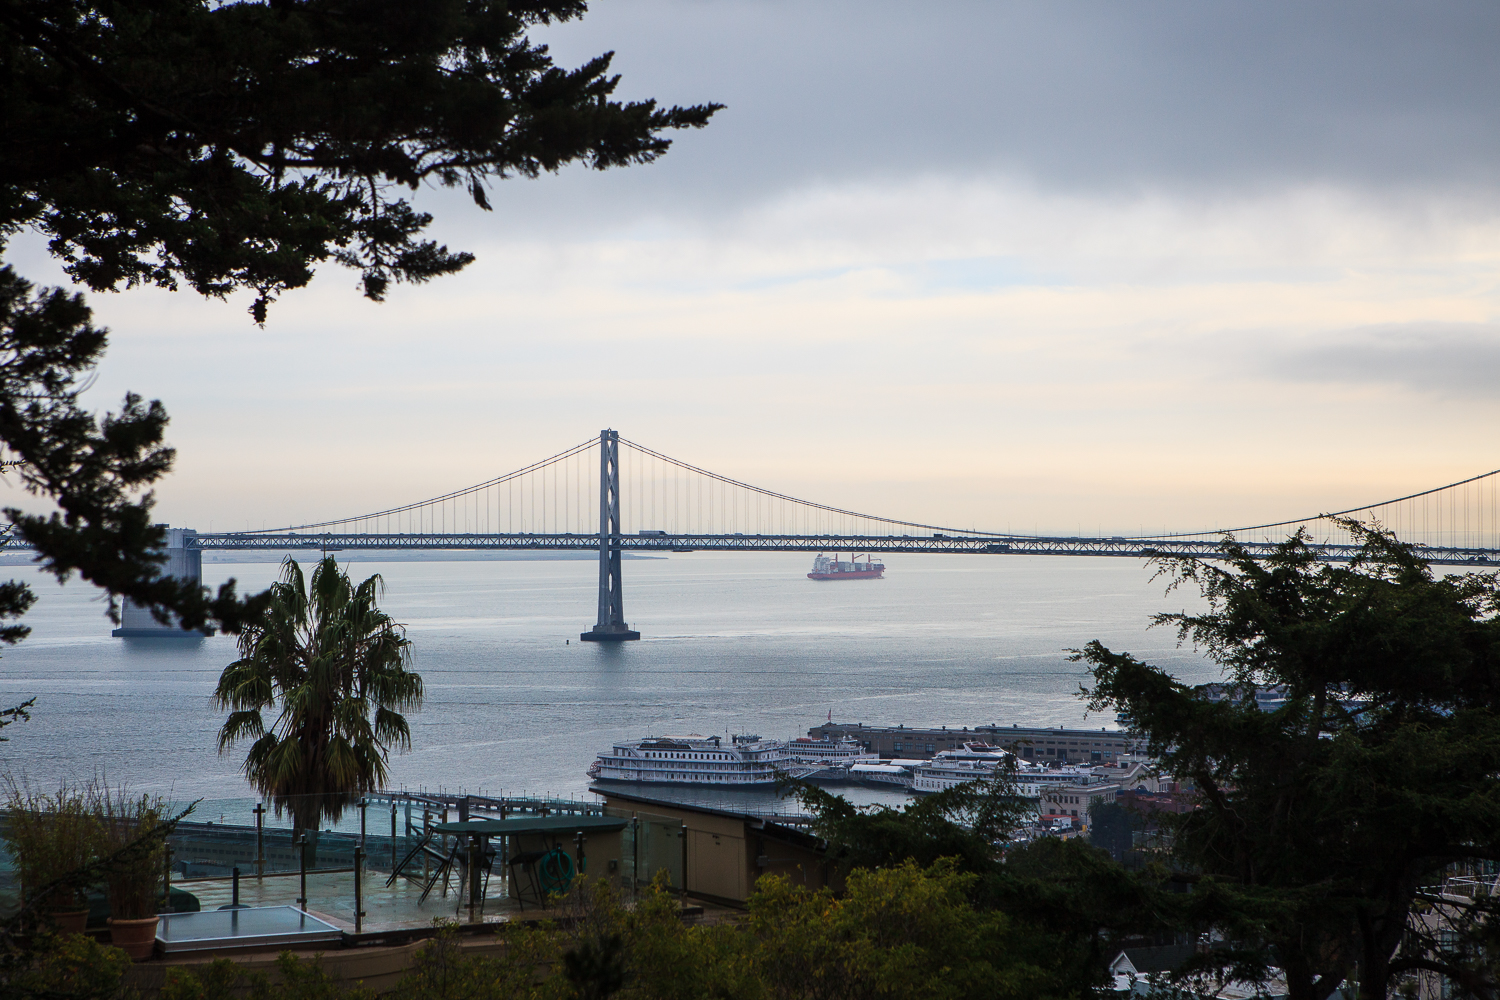 View from the base of Coit Tower